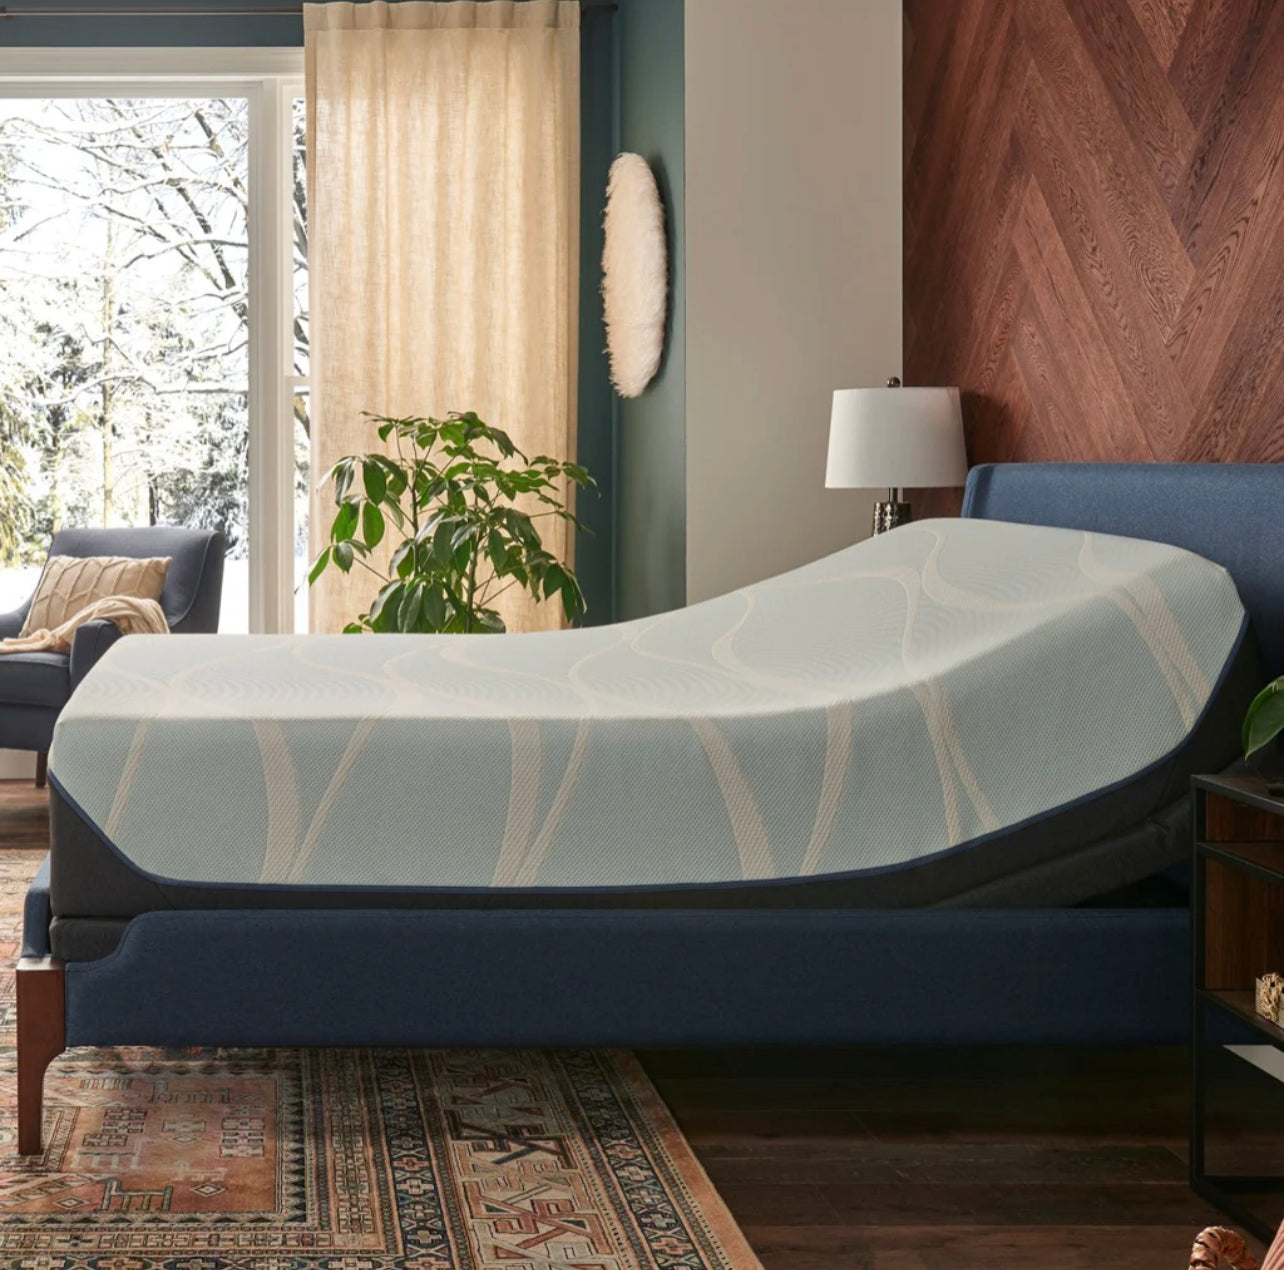 How To Move A Tempurpedic Bed Frame